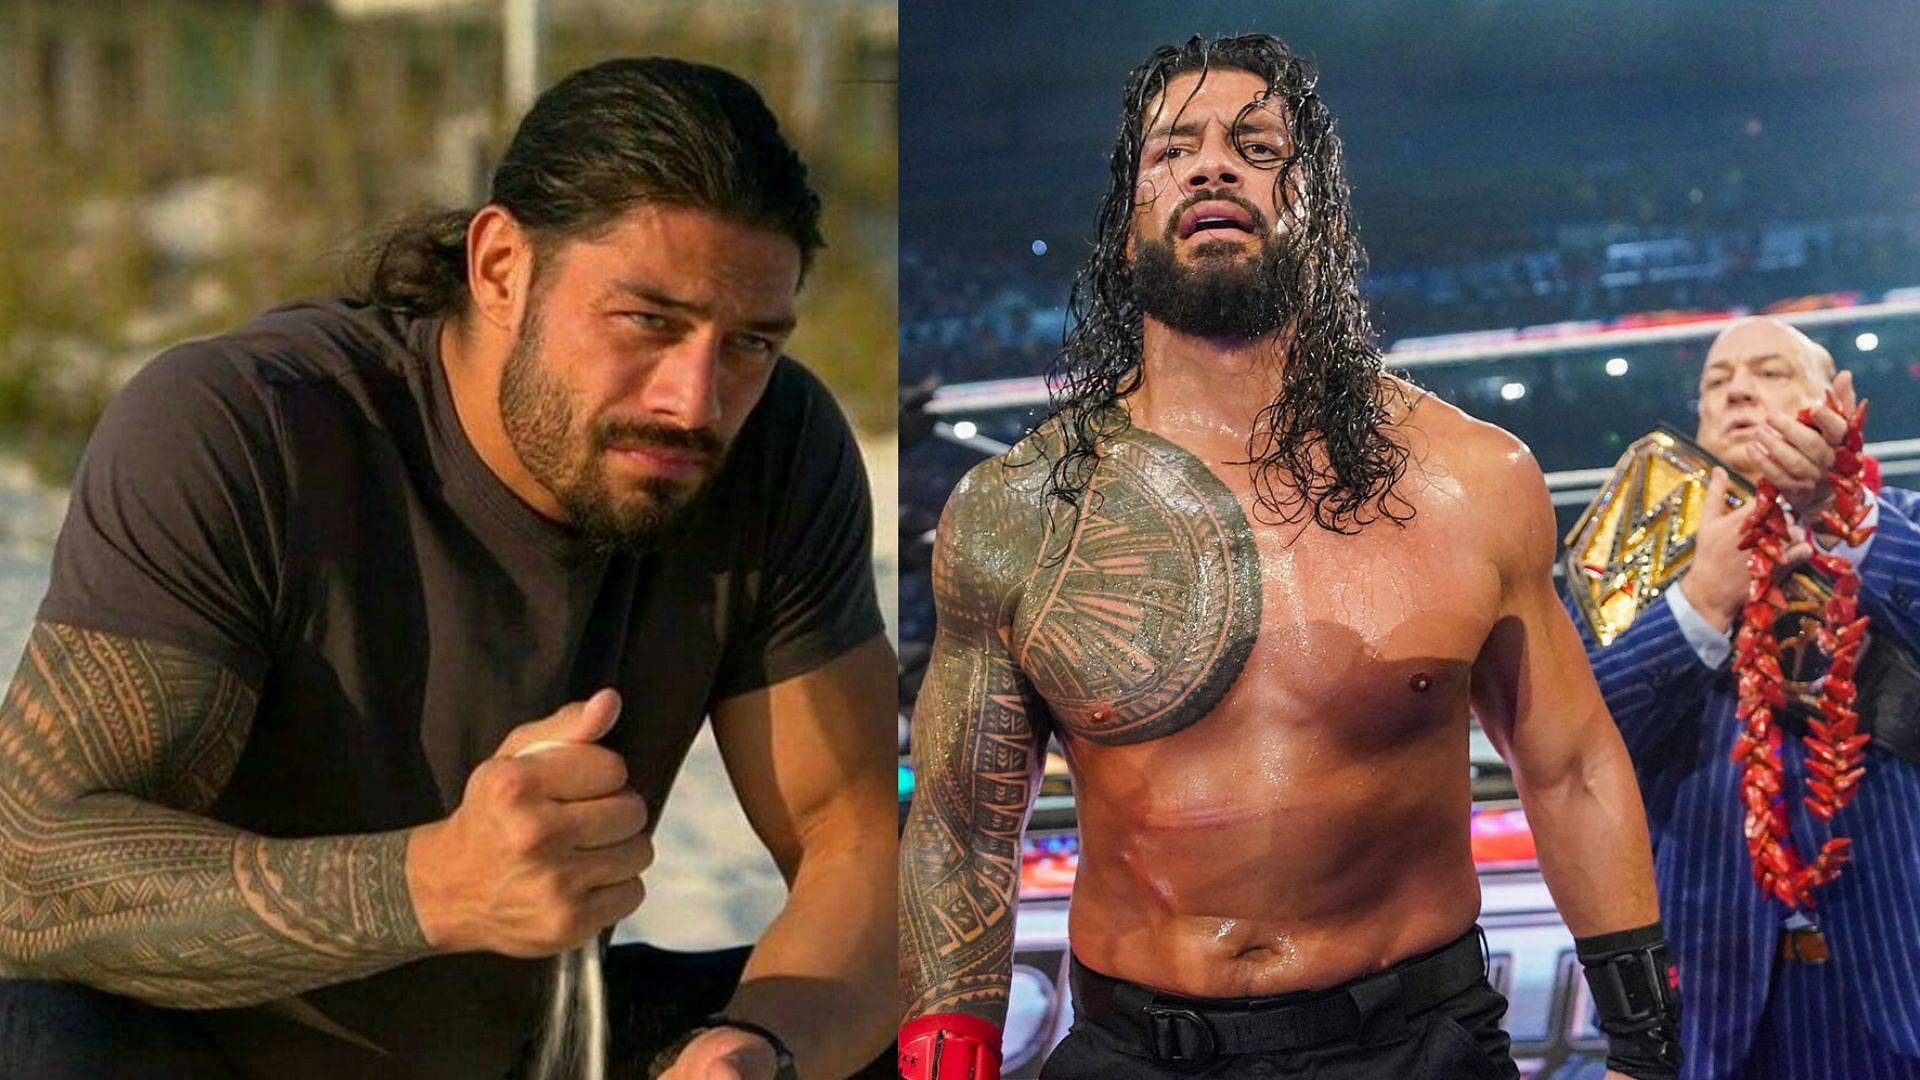 Roman Reigns is set to return to WWE soon.